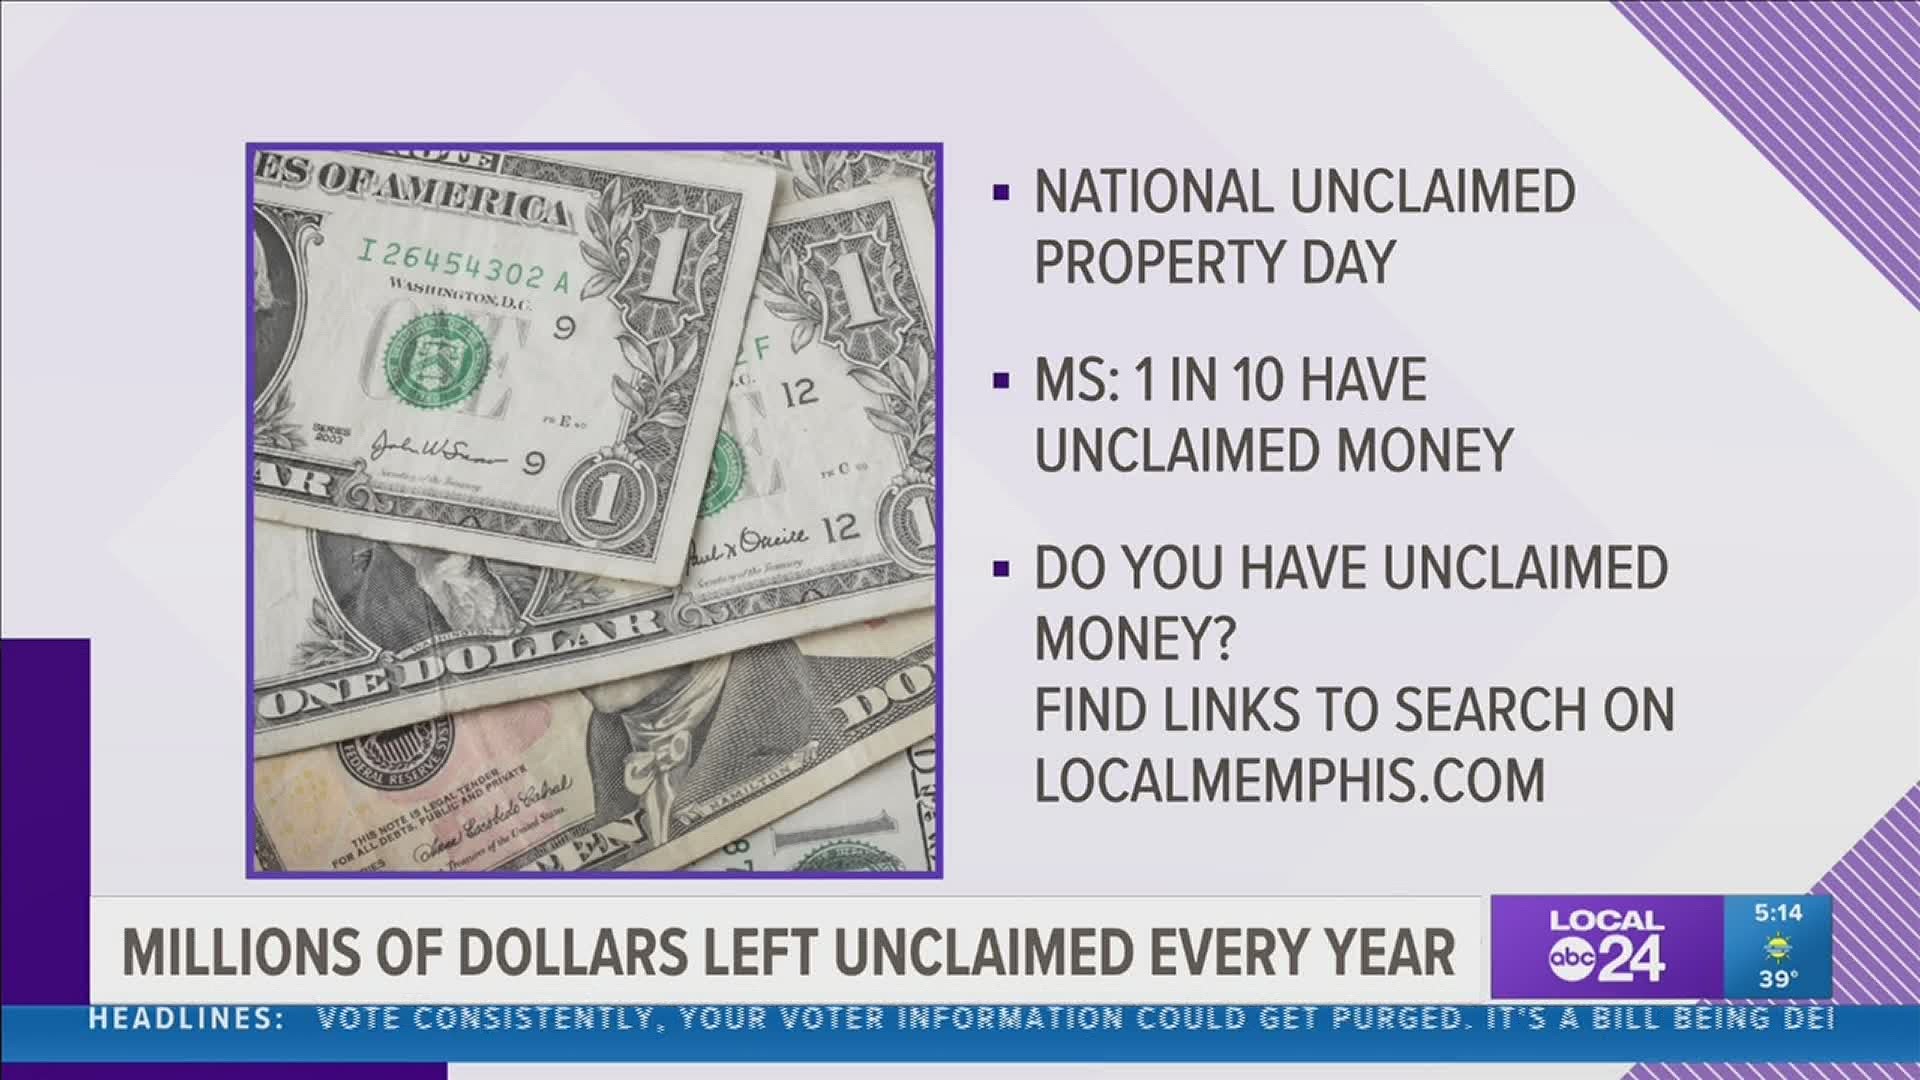 Monday, February 1st is National Unclaimed Property Day.